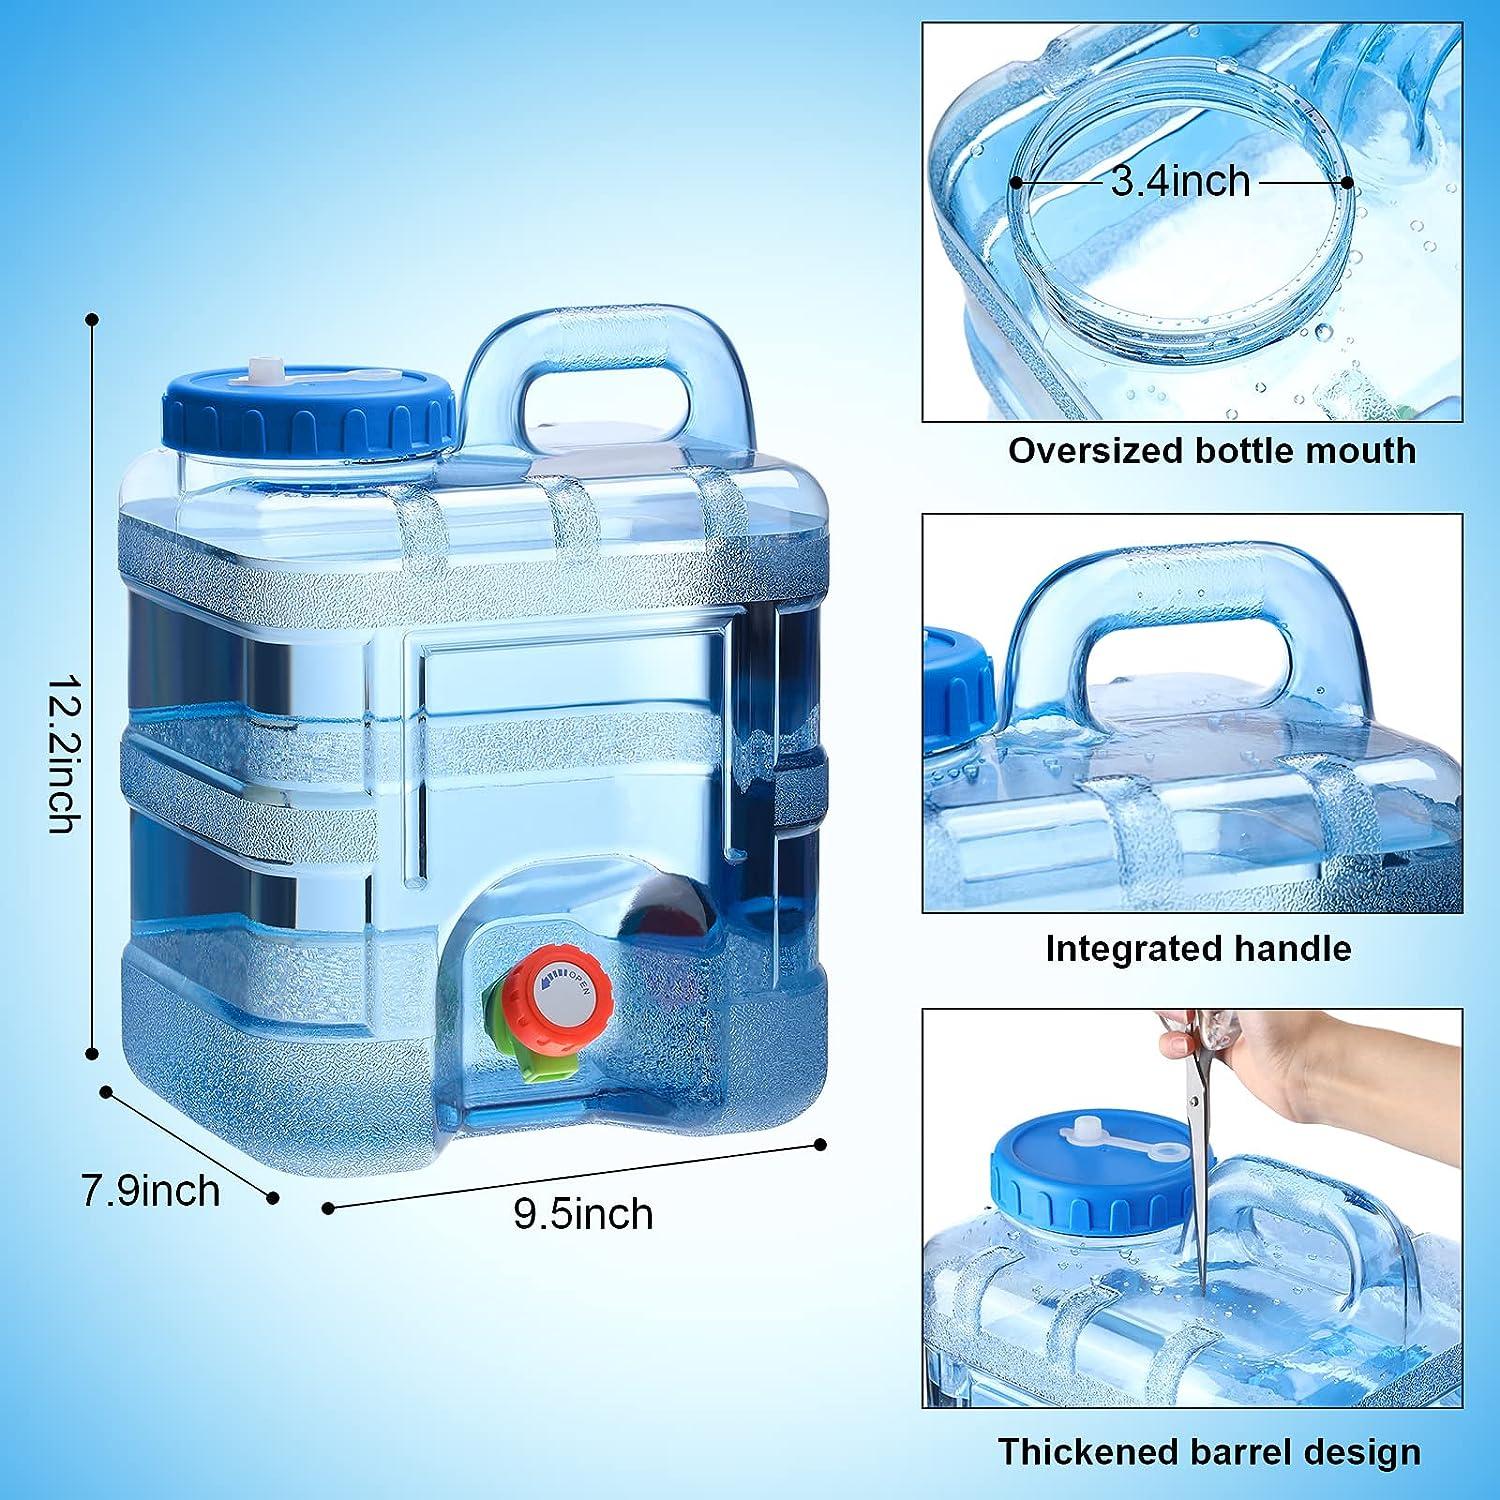 Julam Water Container with Spout Water Dispenser Storage Tank with Spout  Transparent Water Storage for Drink Dispenser for Party justifiable 